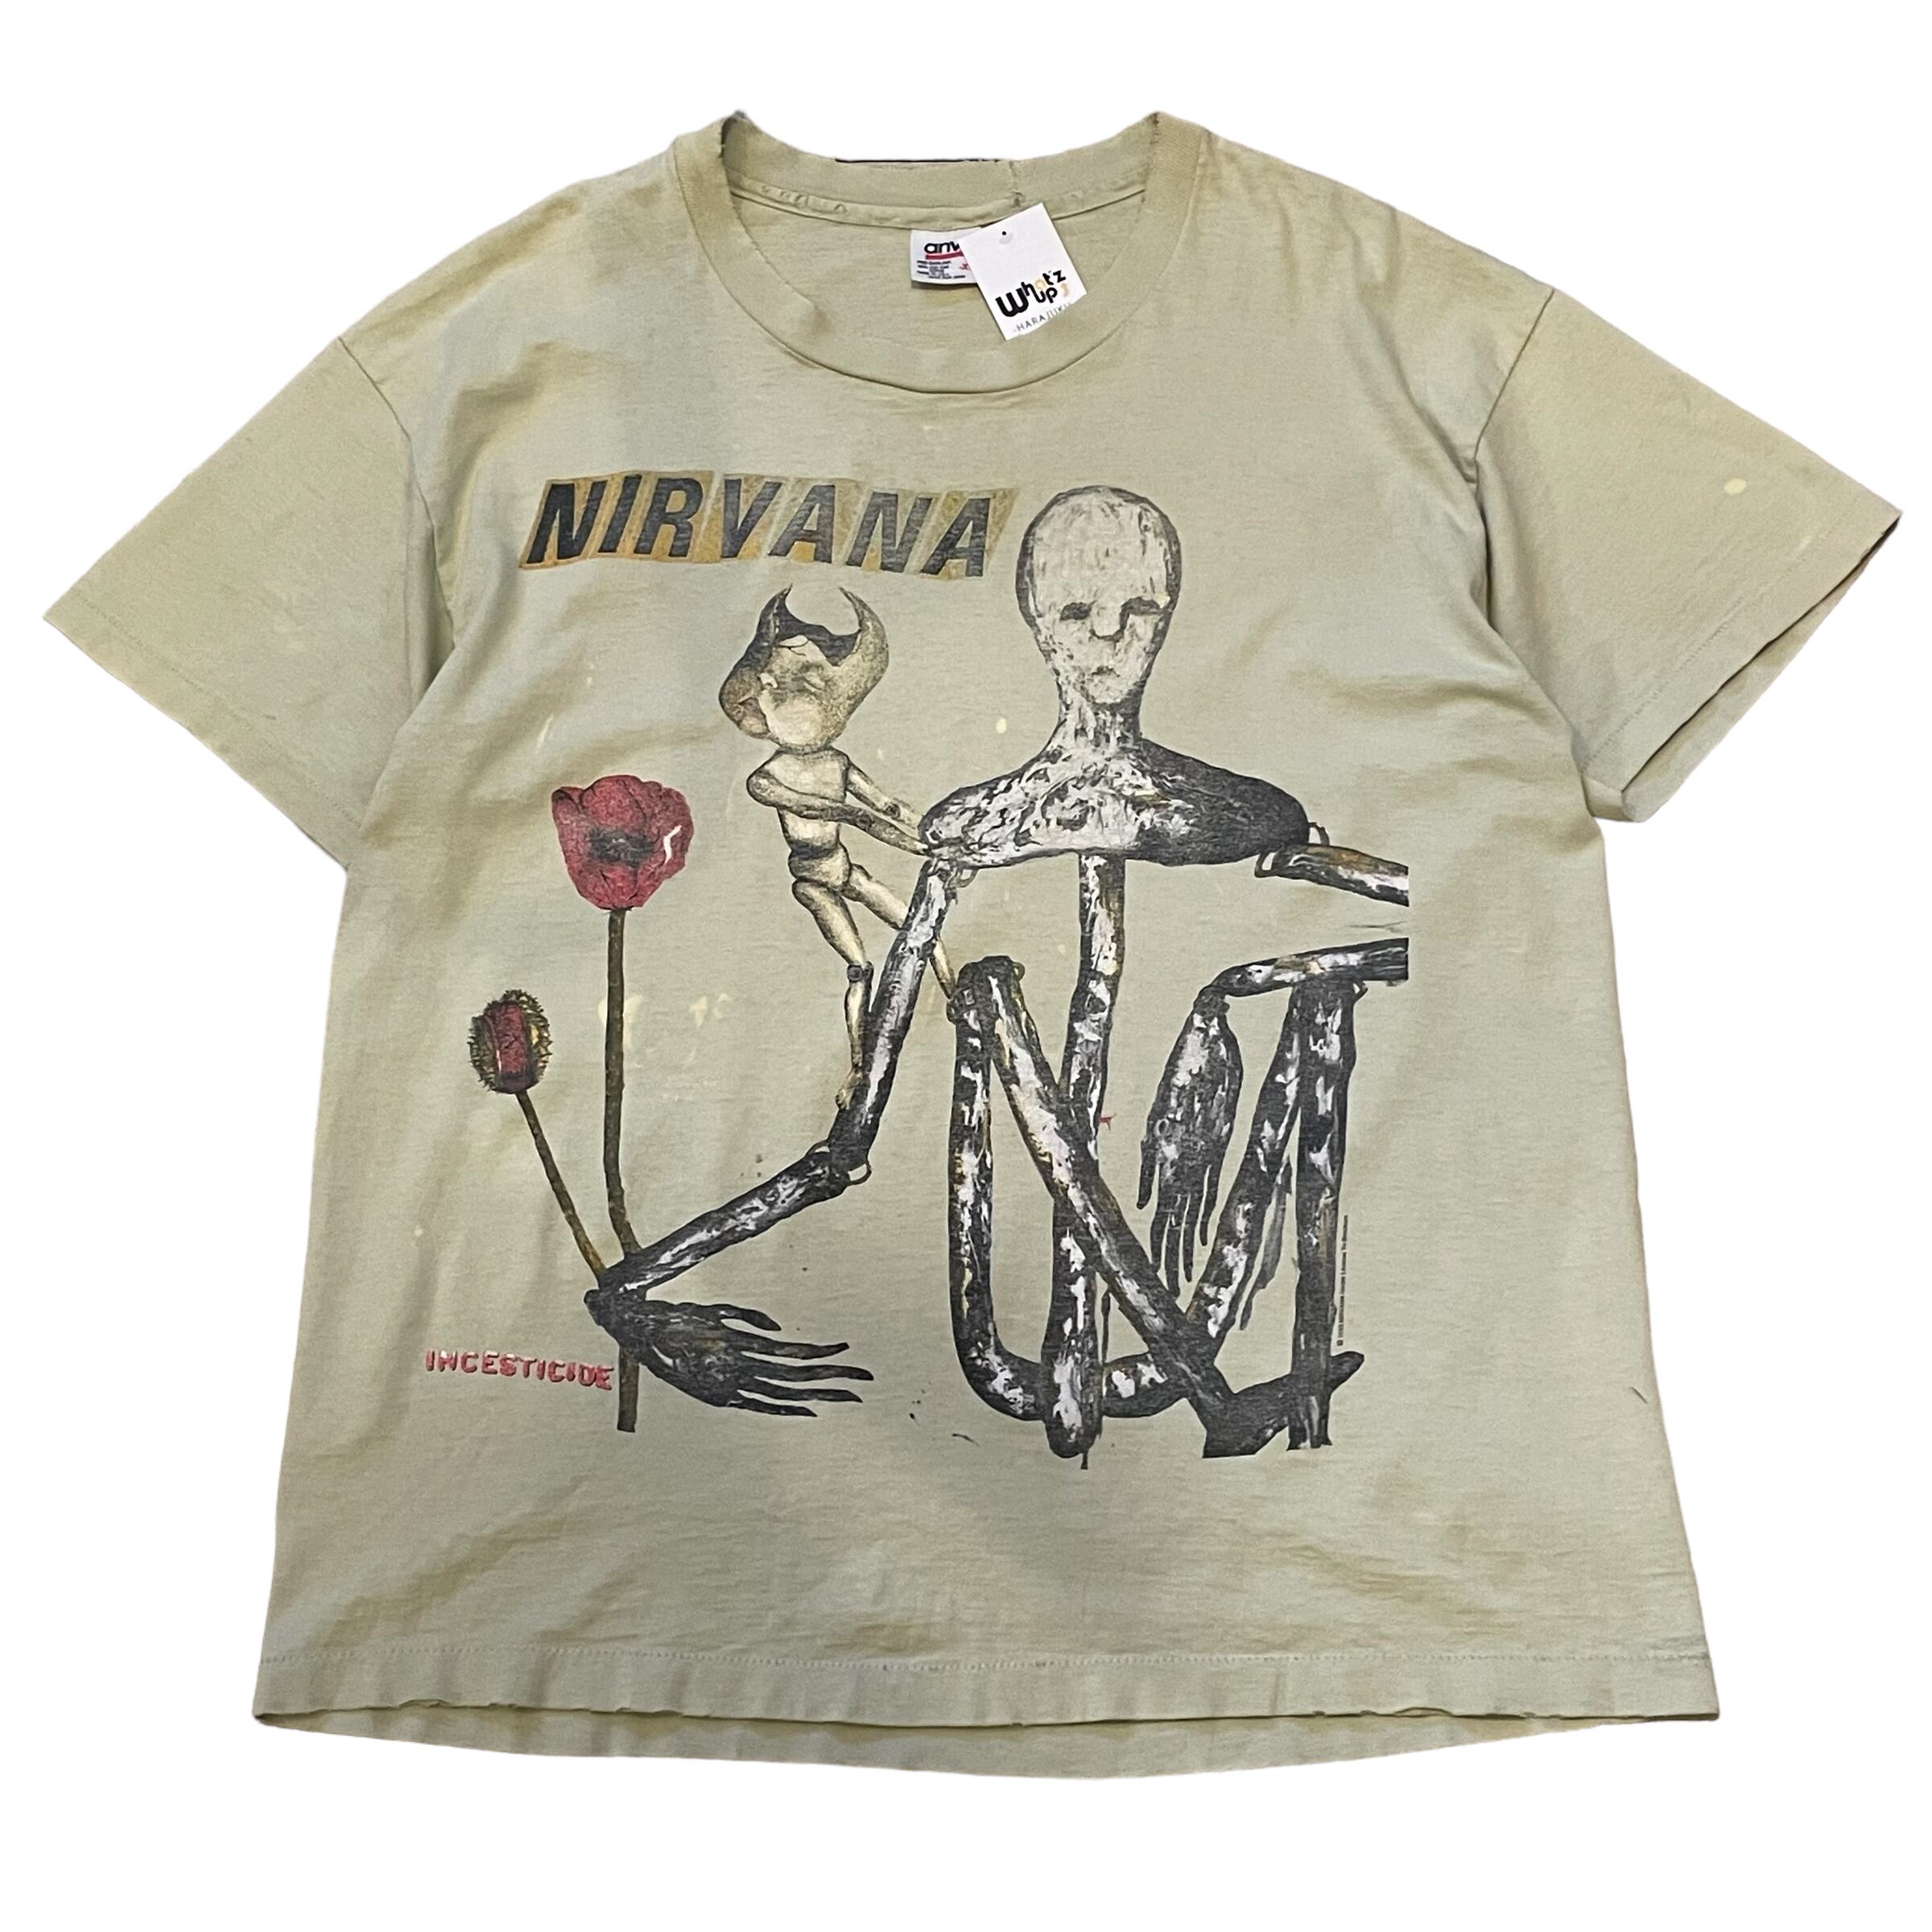 90s NIRVANA “INCESTICIDE” t-shirt | What'z up